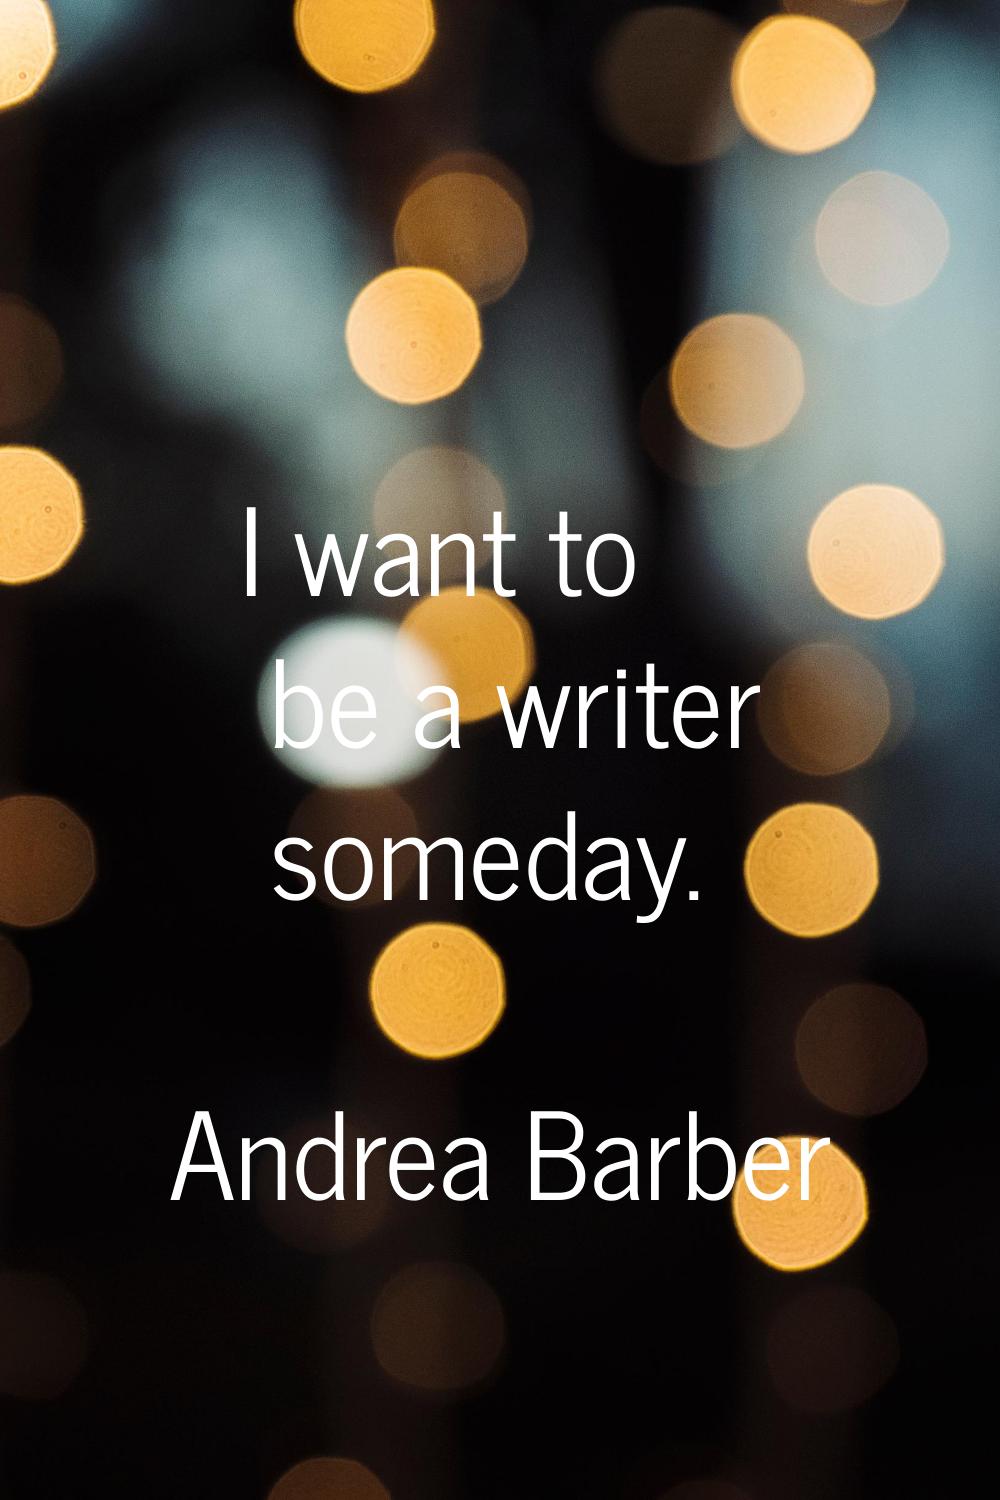 I want to be a writer someday.